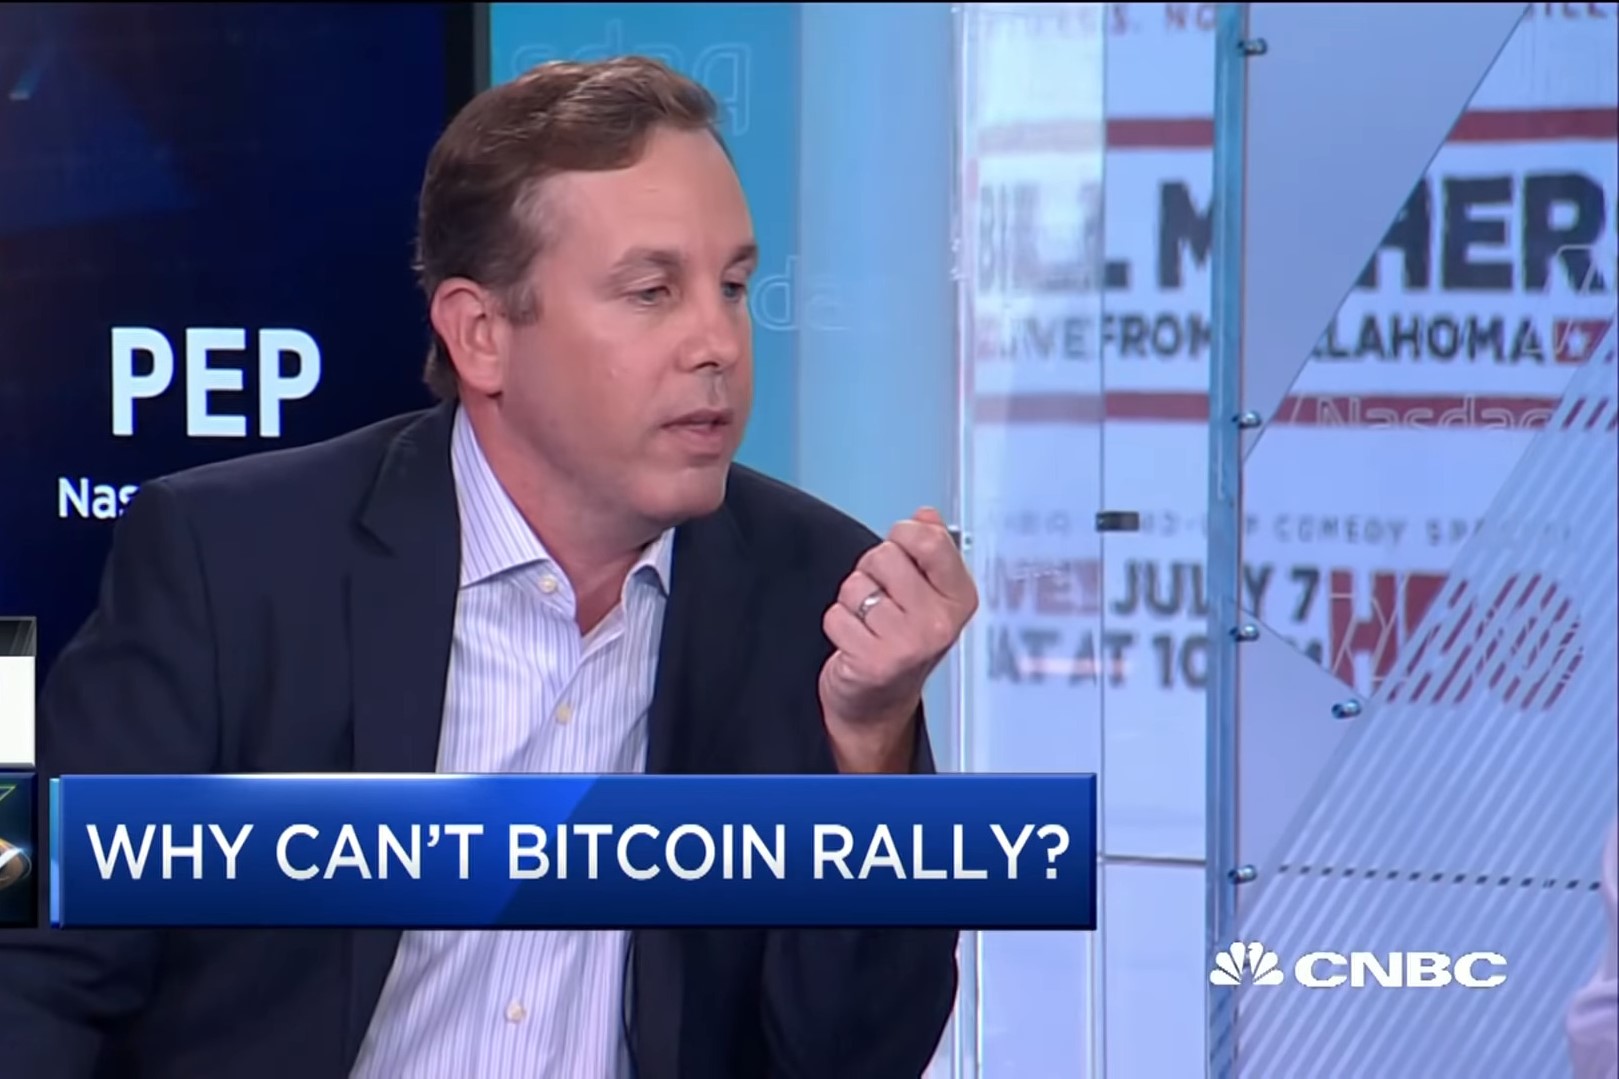 Bitcoin Remains Best Cryptocurrency: Wall Street’s “Crypto King”